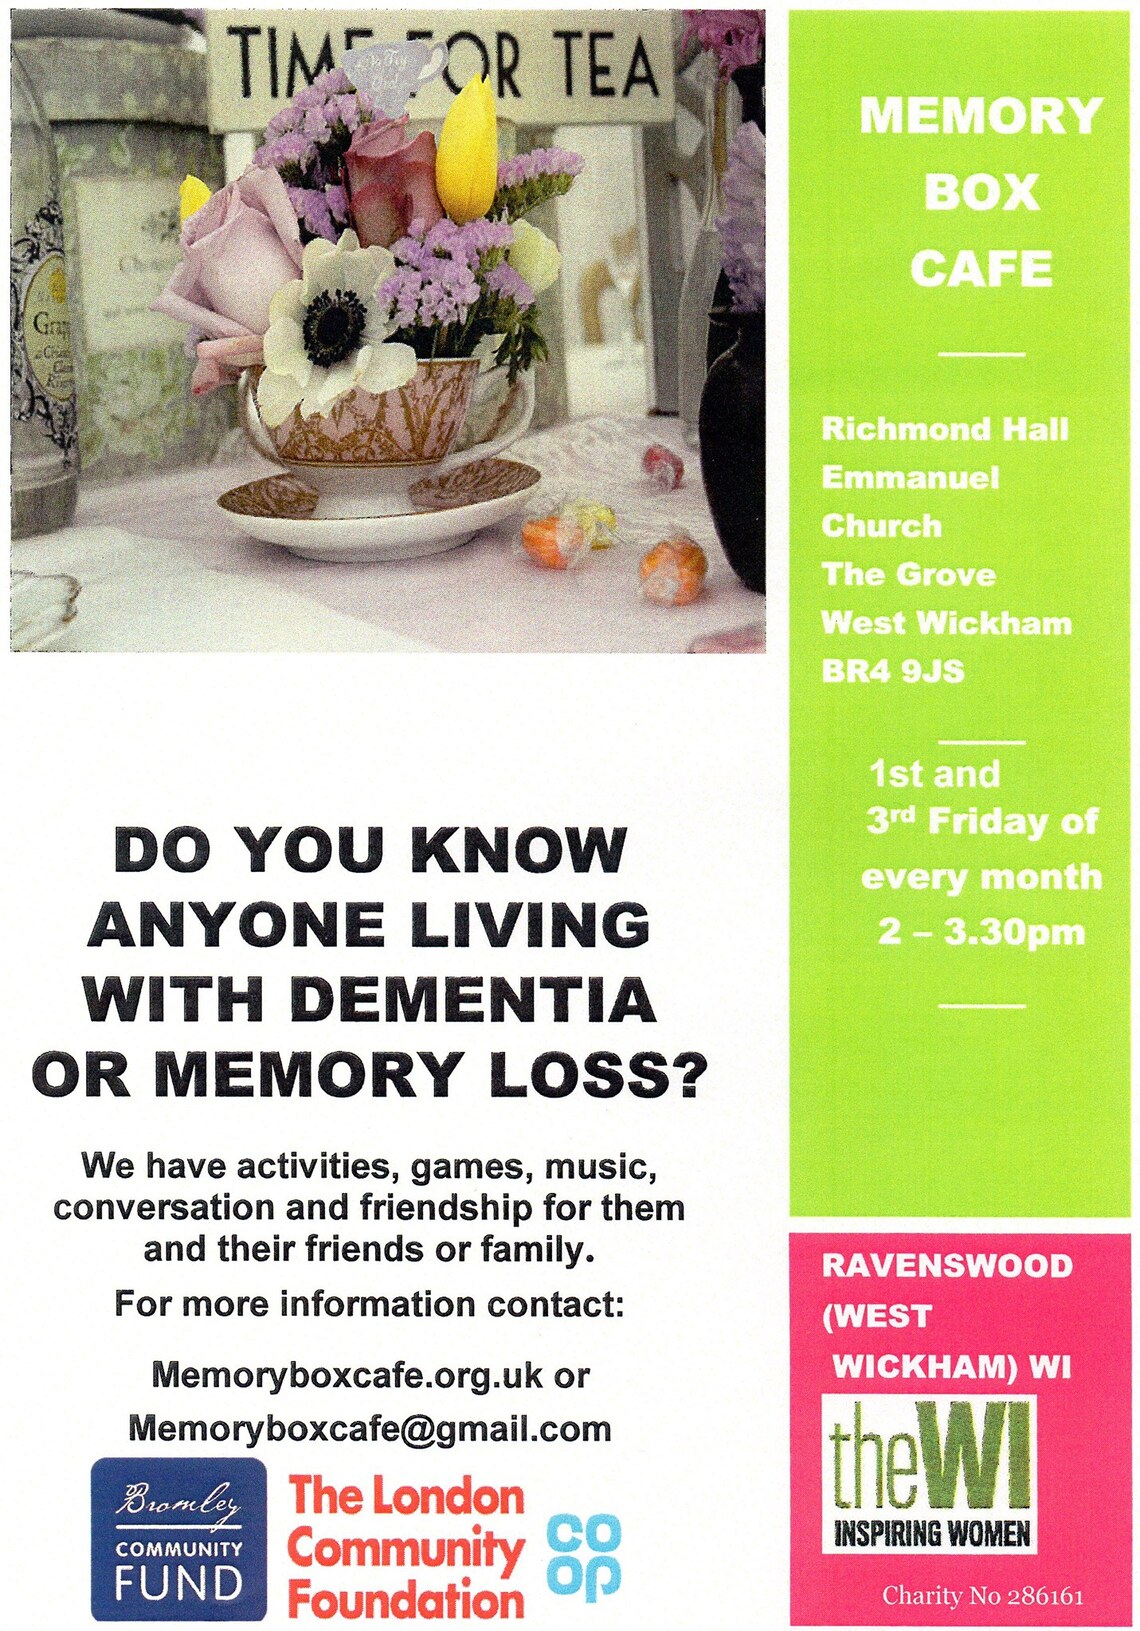 memory box cafe poster details of location and time